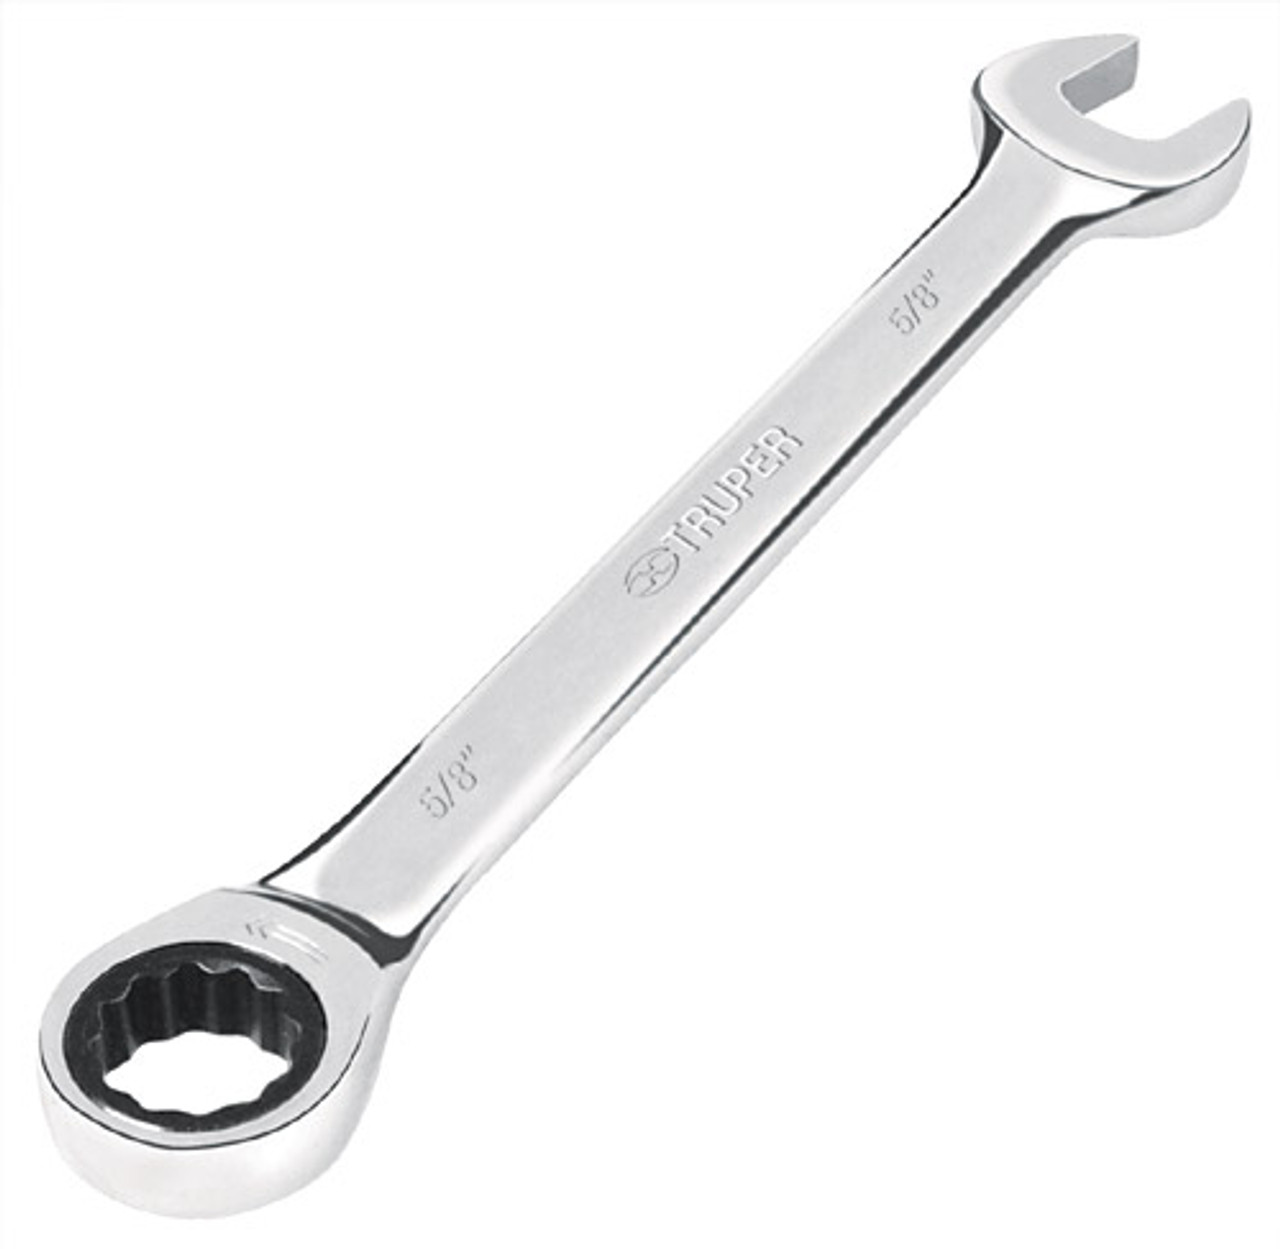 Truper 5/8x8" Combination Ratcheting Wrench #15740